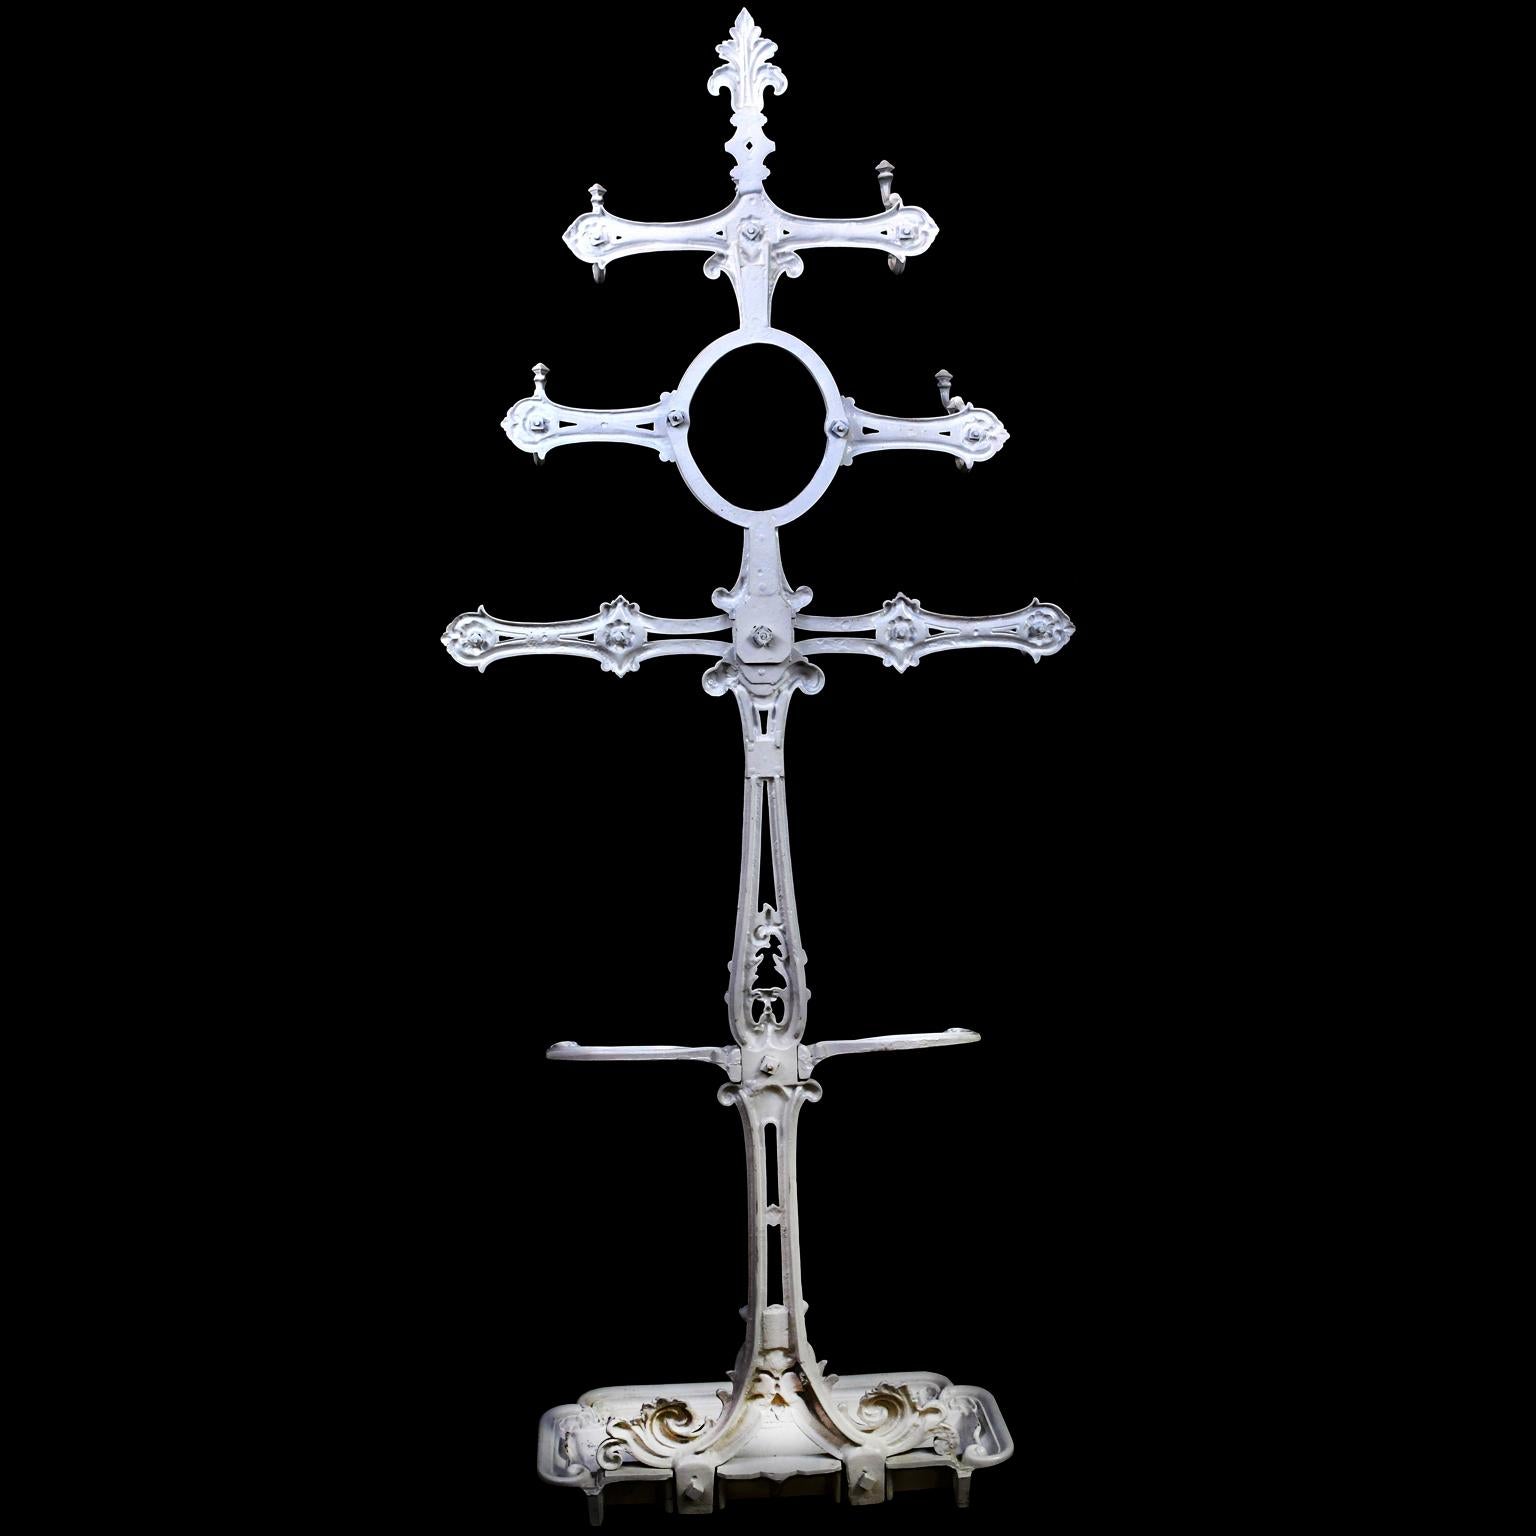 Late Victorian Victorian Cast Iron Coat or Hat Rack with Umbrella Stand, circa 1870 For Sale